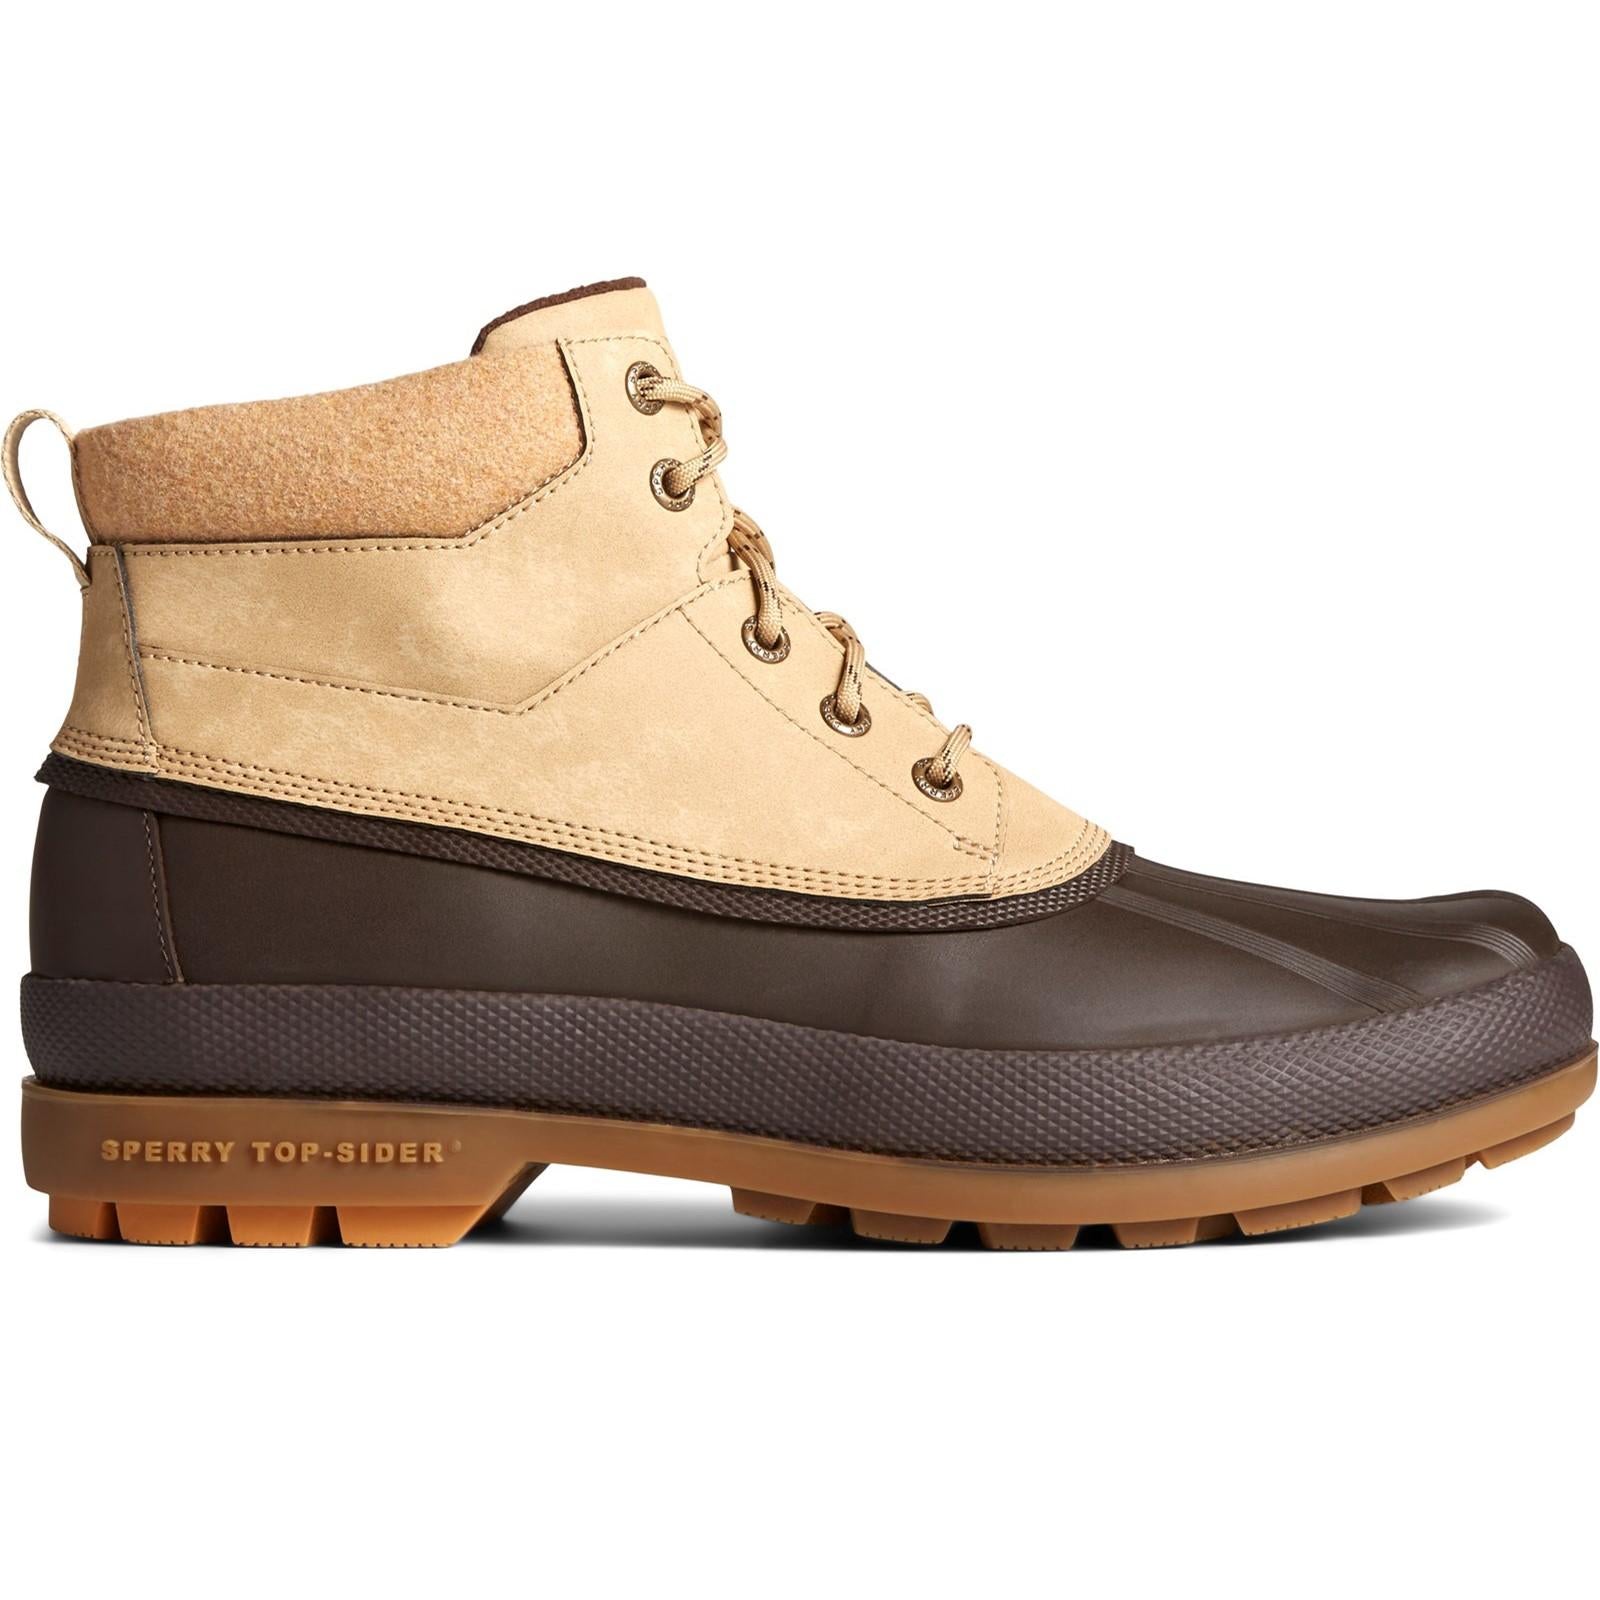 Sperry Top-sider Cold Bay Chukka Boots